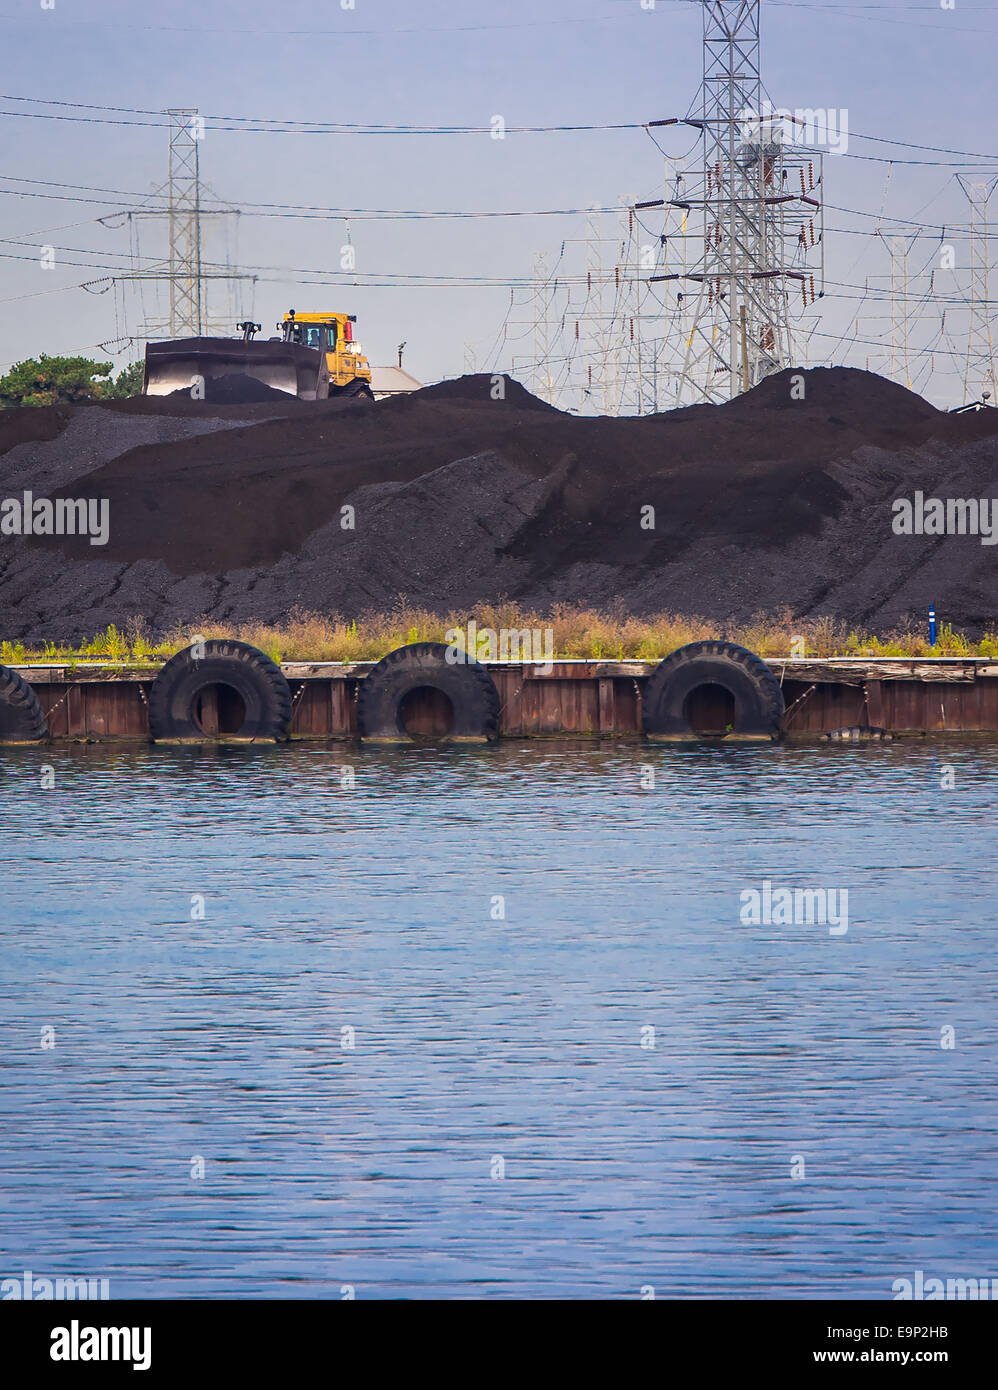 Coal used to generate electricity for Detroit area Stock Photo